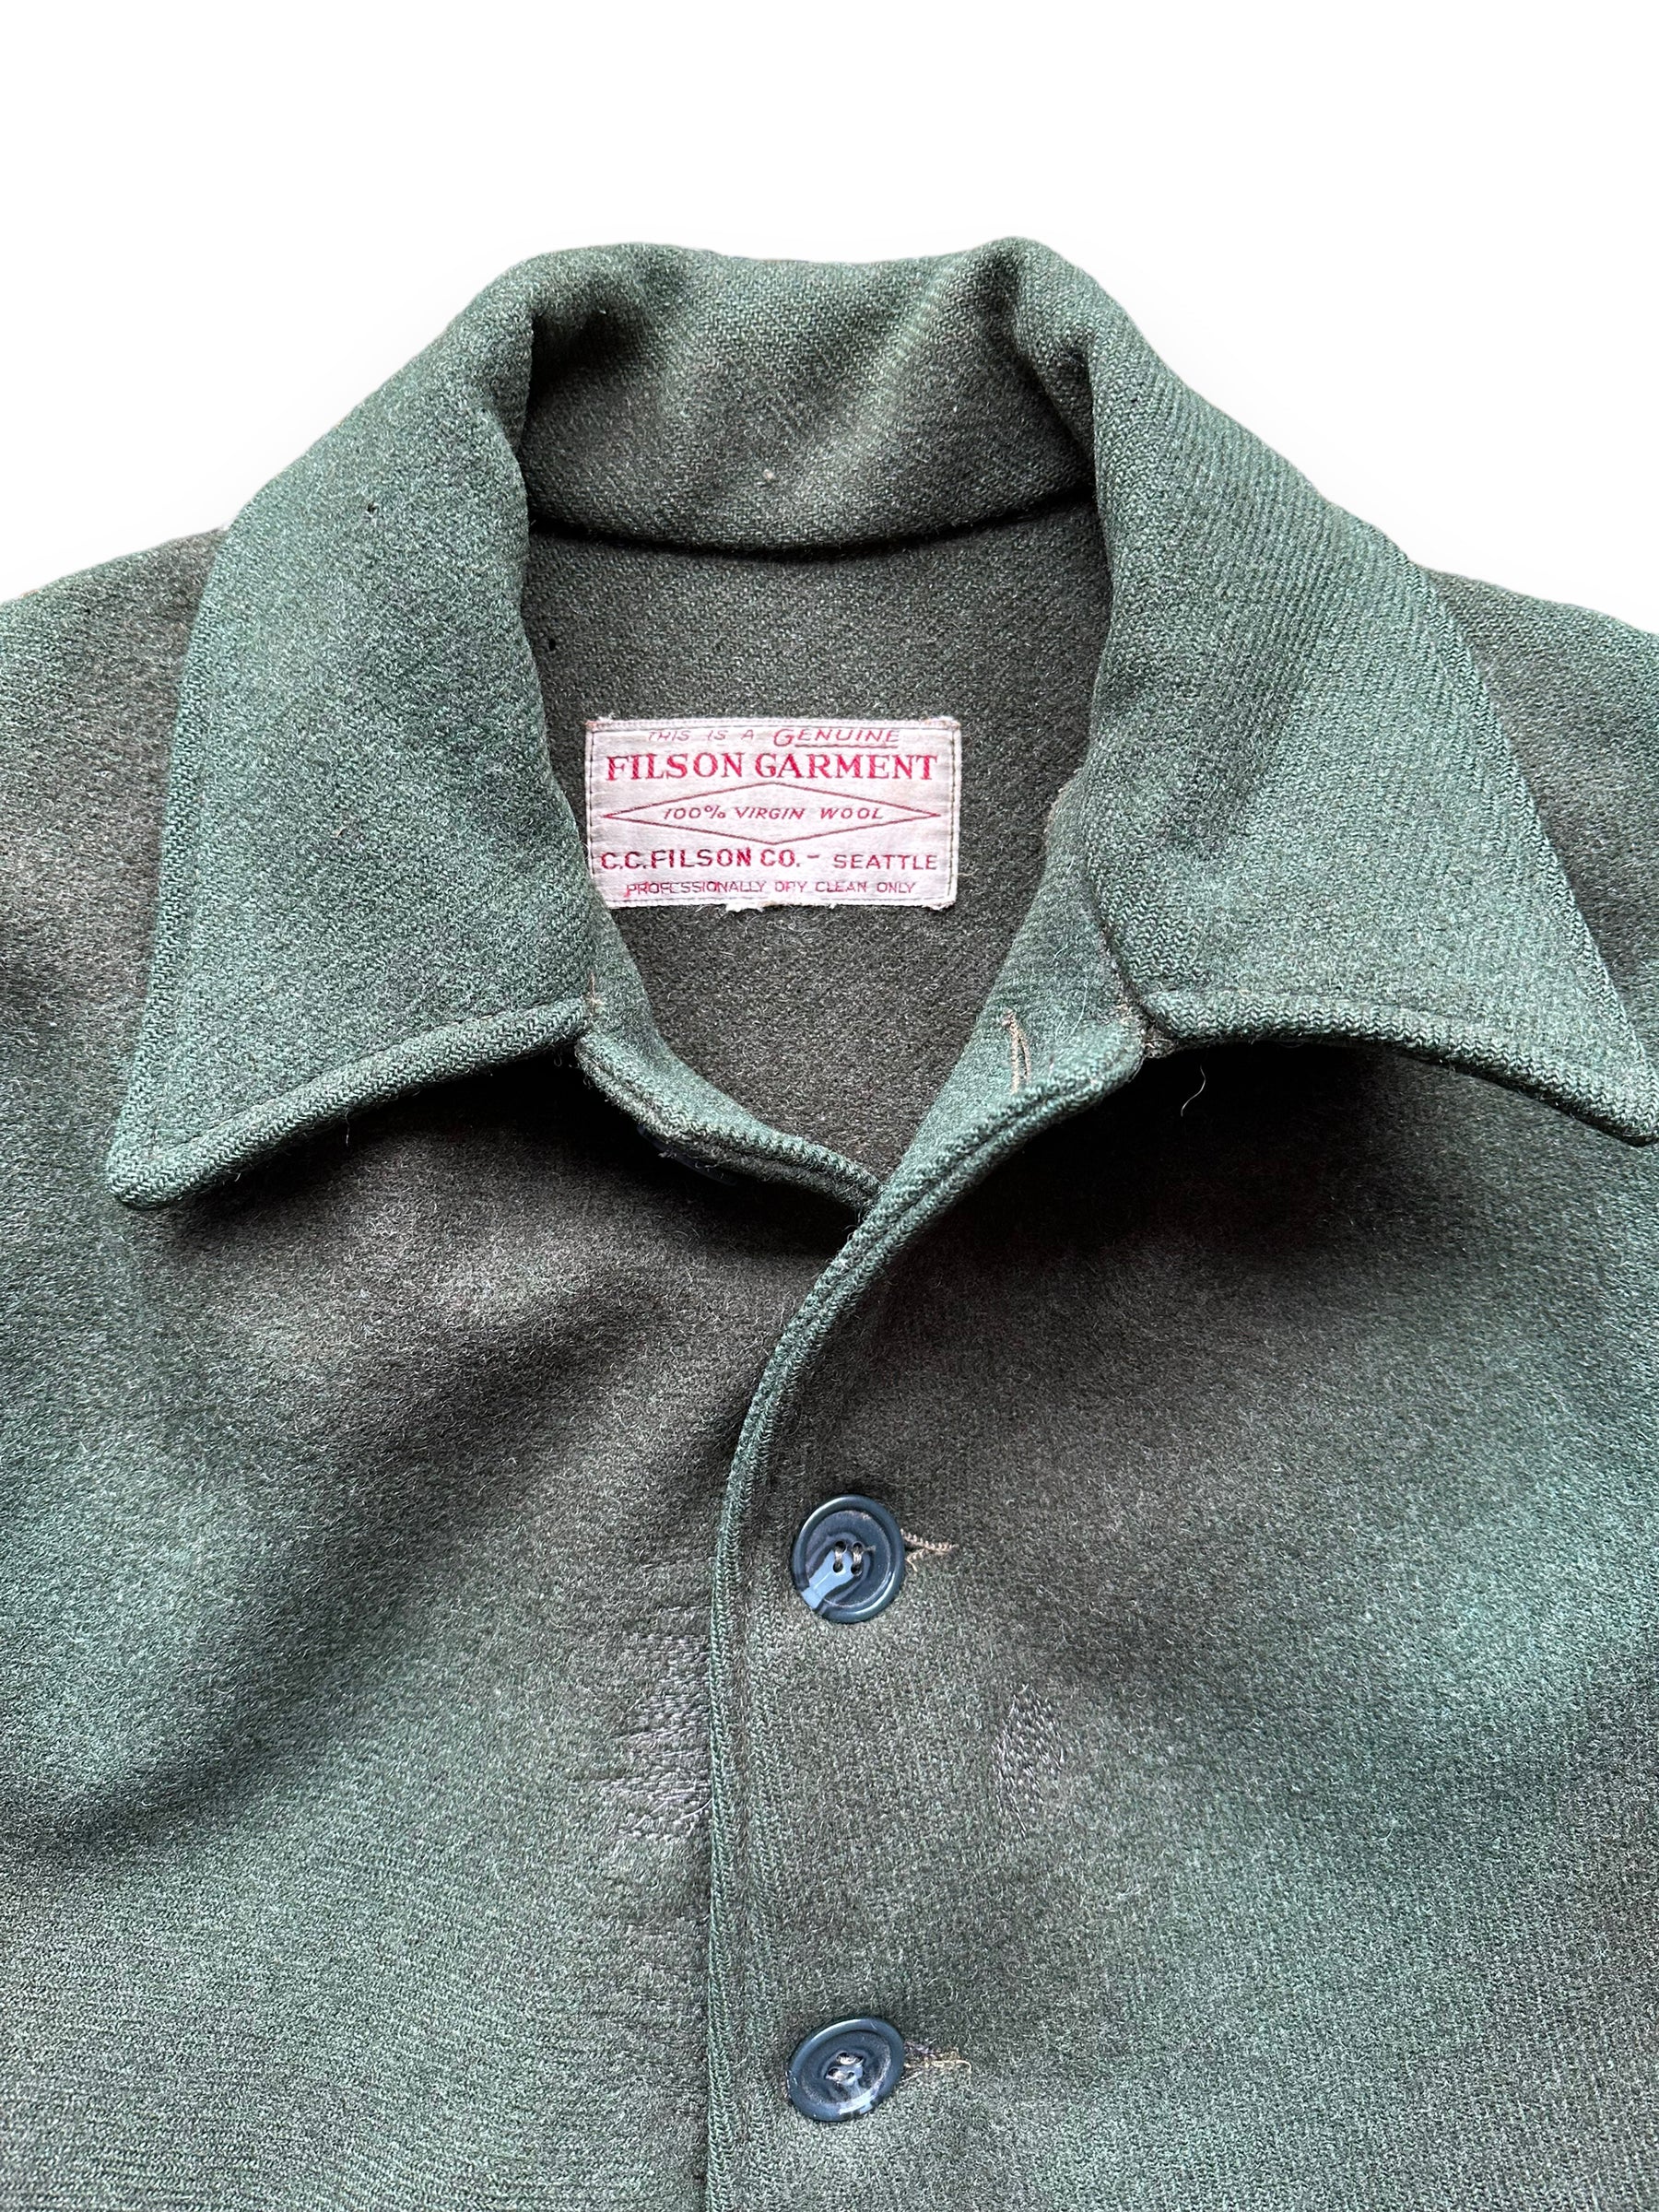 Upper Tag View on Vintage Filson Forest Green Repaired Double Mackinaw Cruiser SZ 40 |  Vintage Filson Cruiser Seattle | Vintage Workwear Seattle